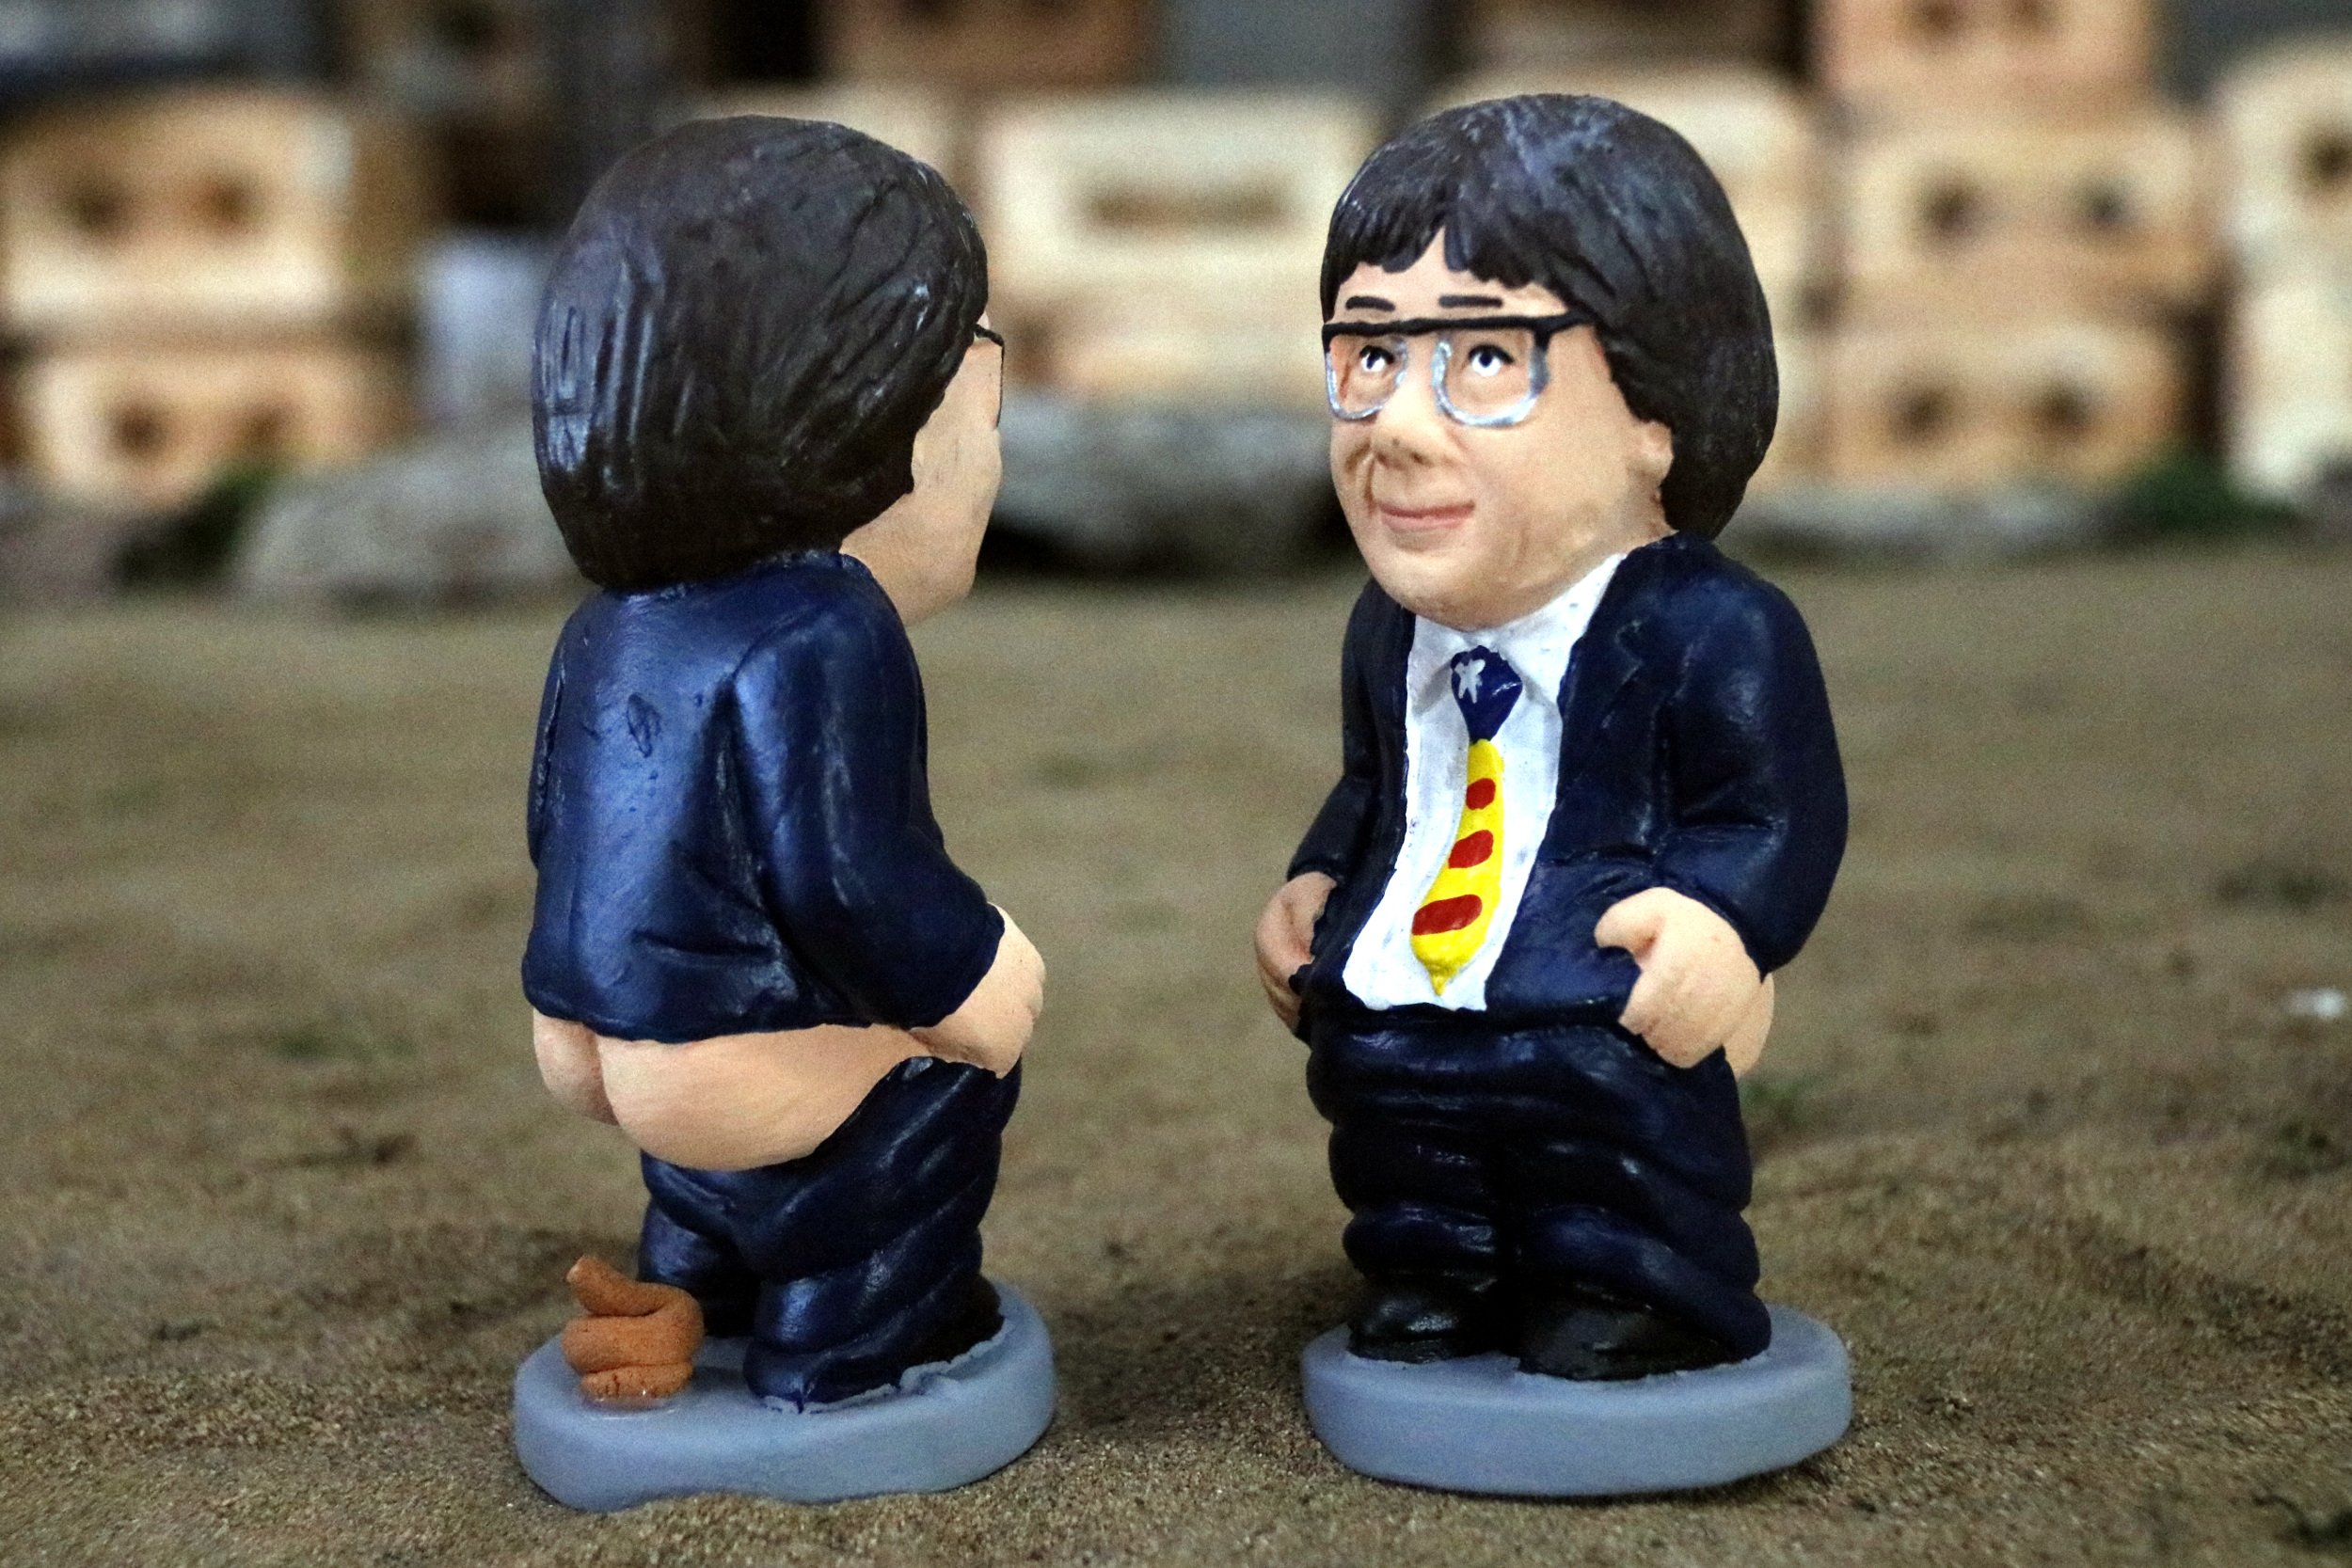 The Puigdemont 'caganer', a Christmas bestseller around Spain